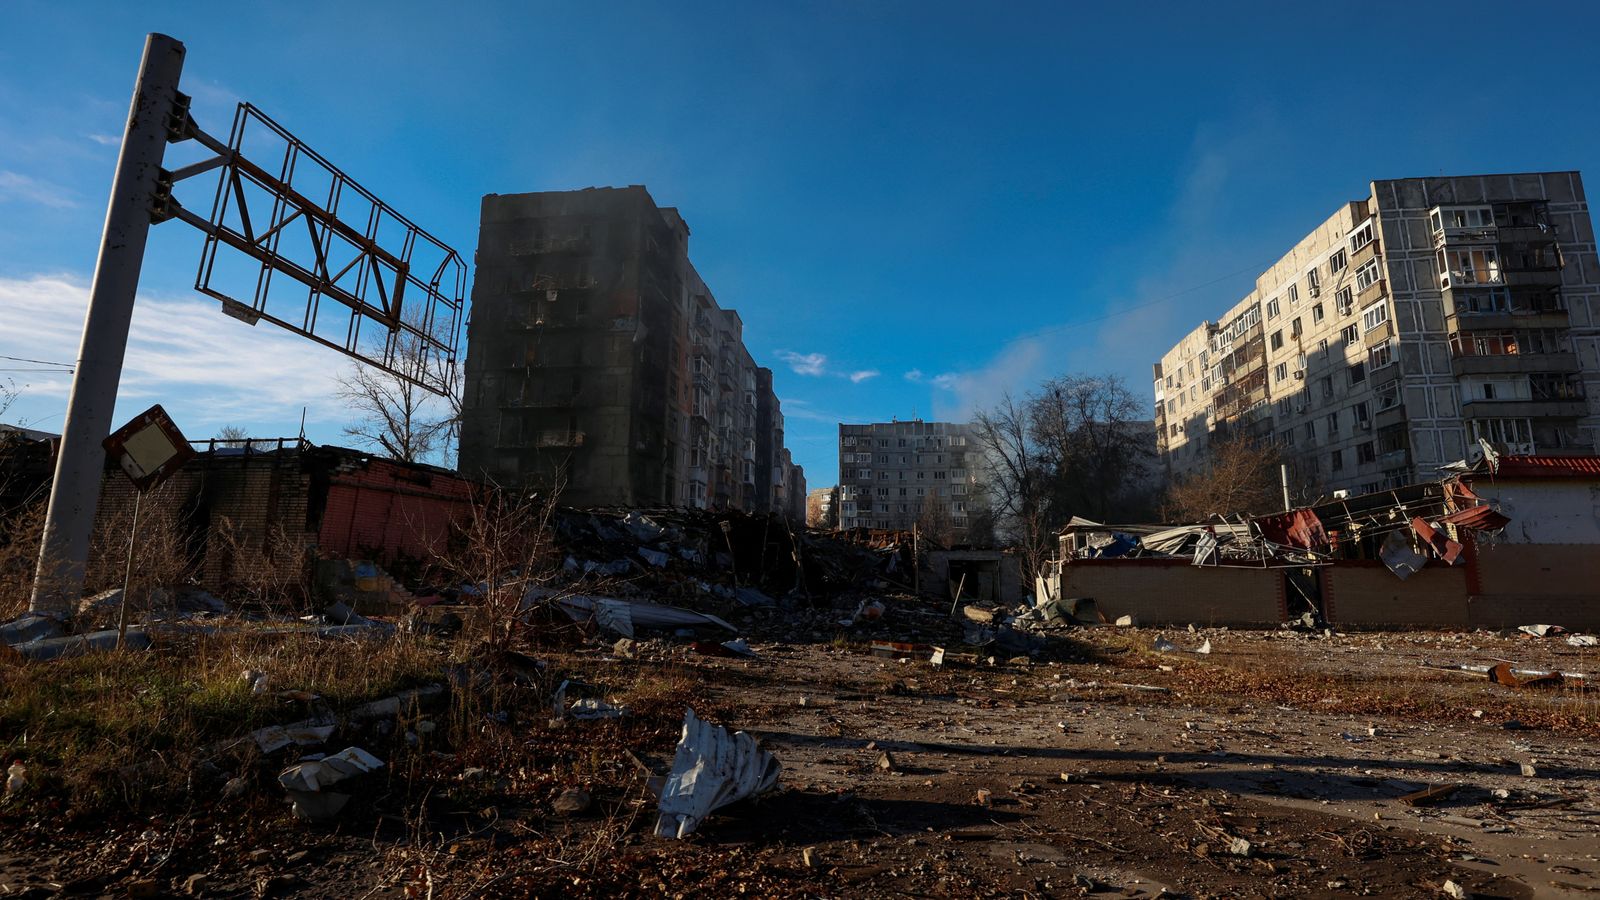 ukraine's army chief says forces have pulled out of frontline city to 'avoid encirclement'